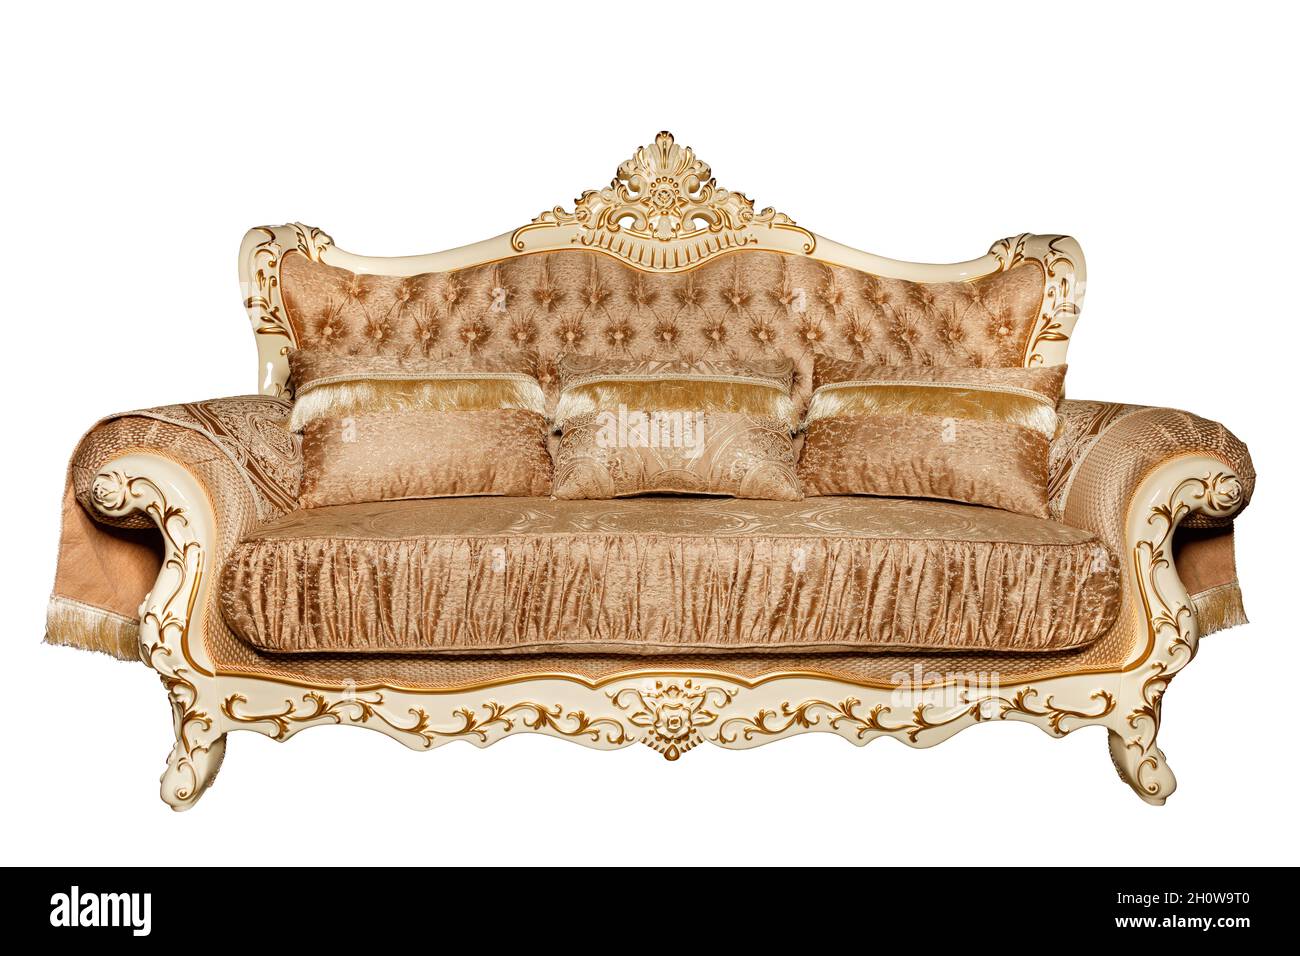 Luxurious sofa upholstered in an expensive light brown brocade textile, isolated on a white background. Stock Photo